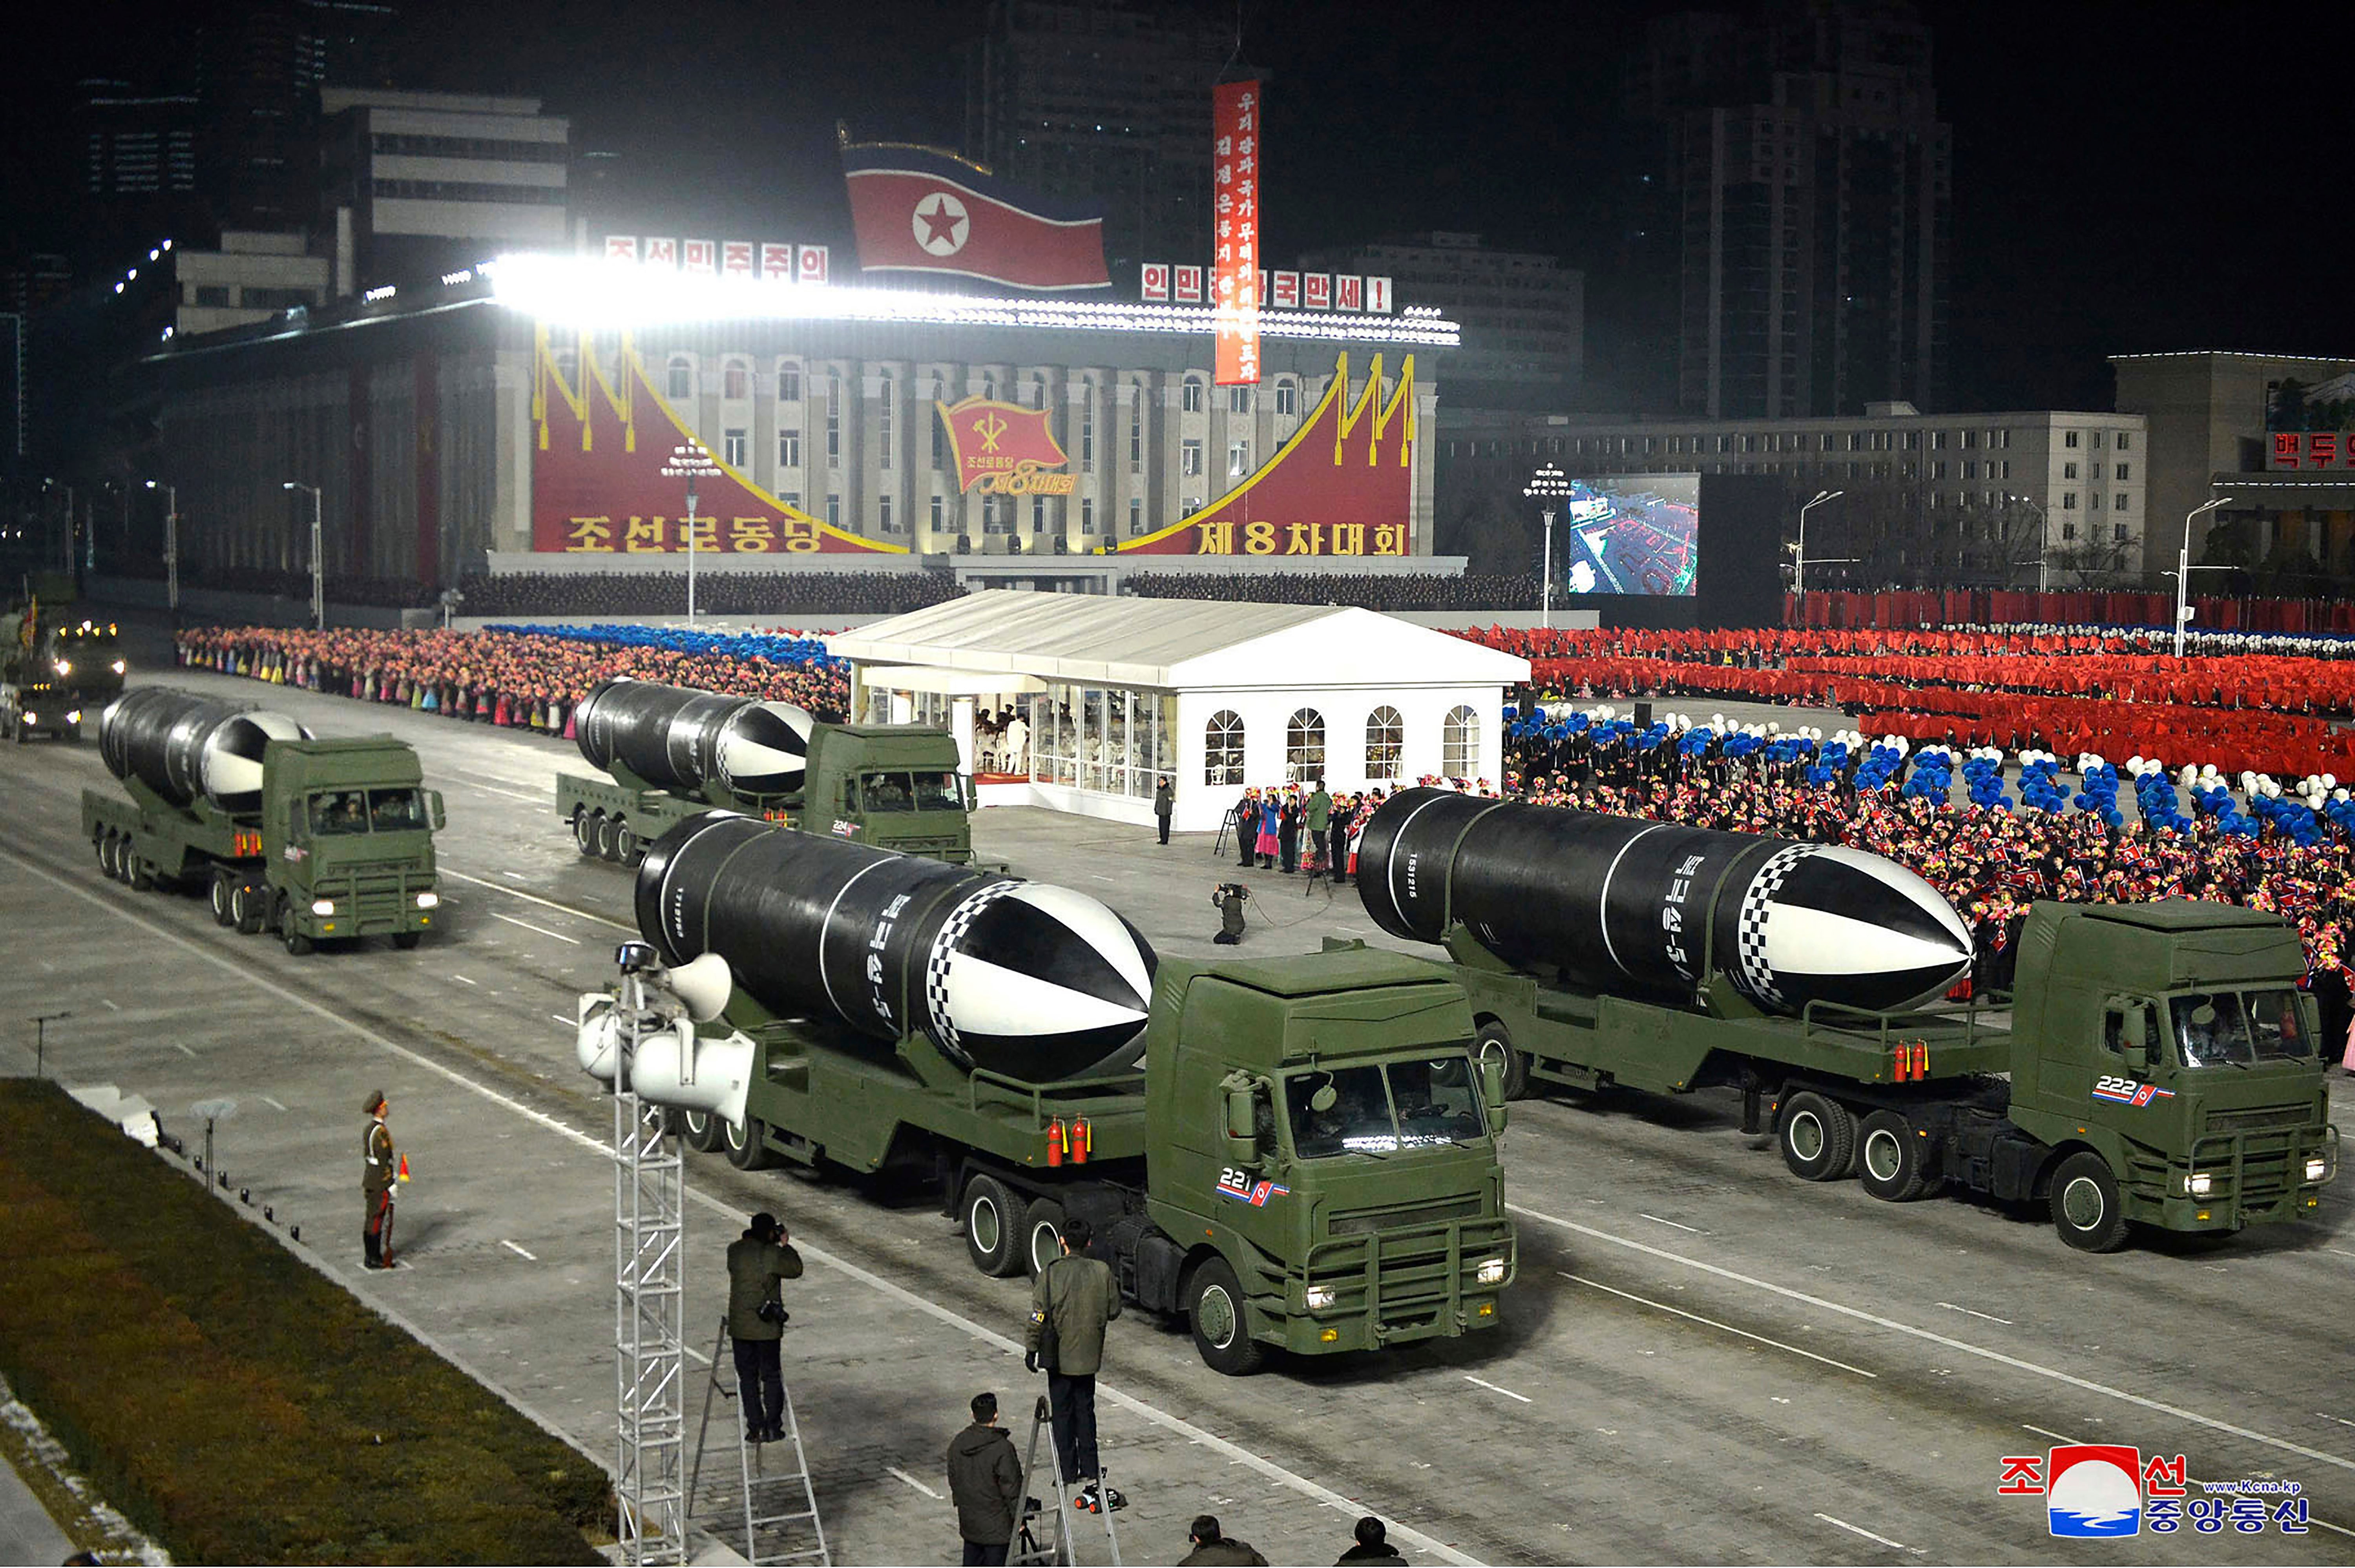 Military parade on 14 January 2021 at Kim Il Sung Square in Pyongyang, North Korea